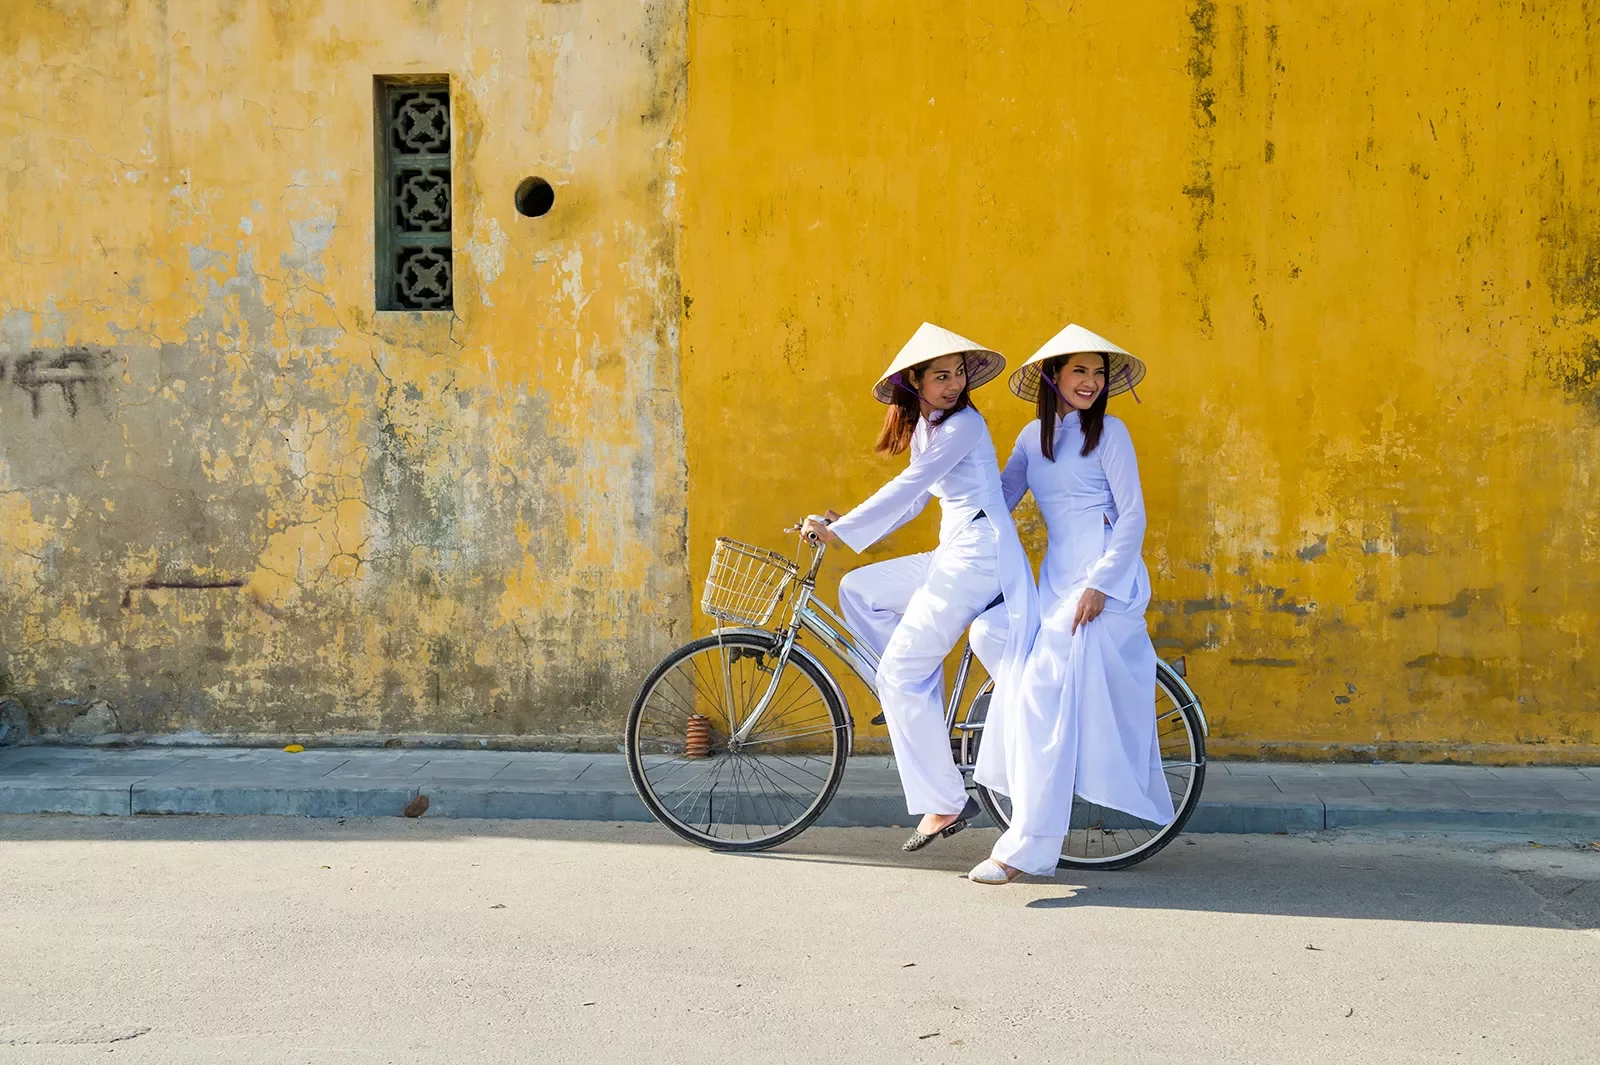 Two women on a bike in front of a yellow wall in Vietnam